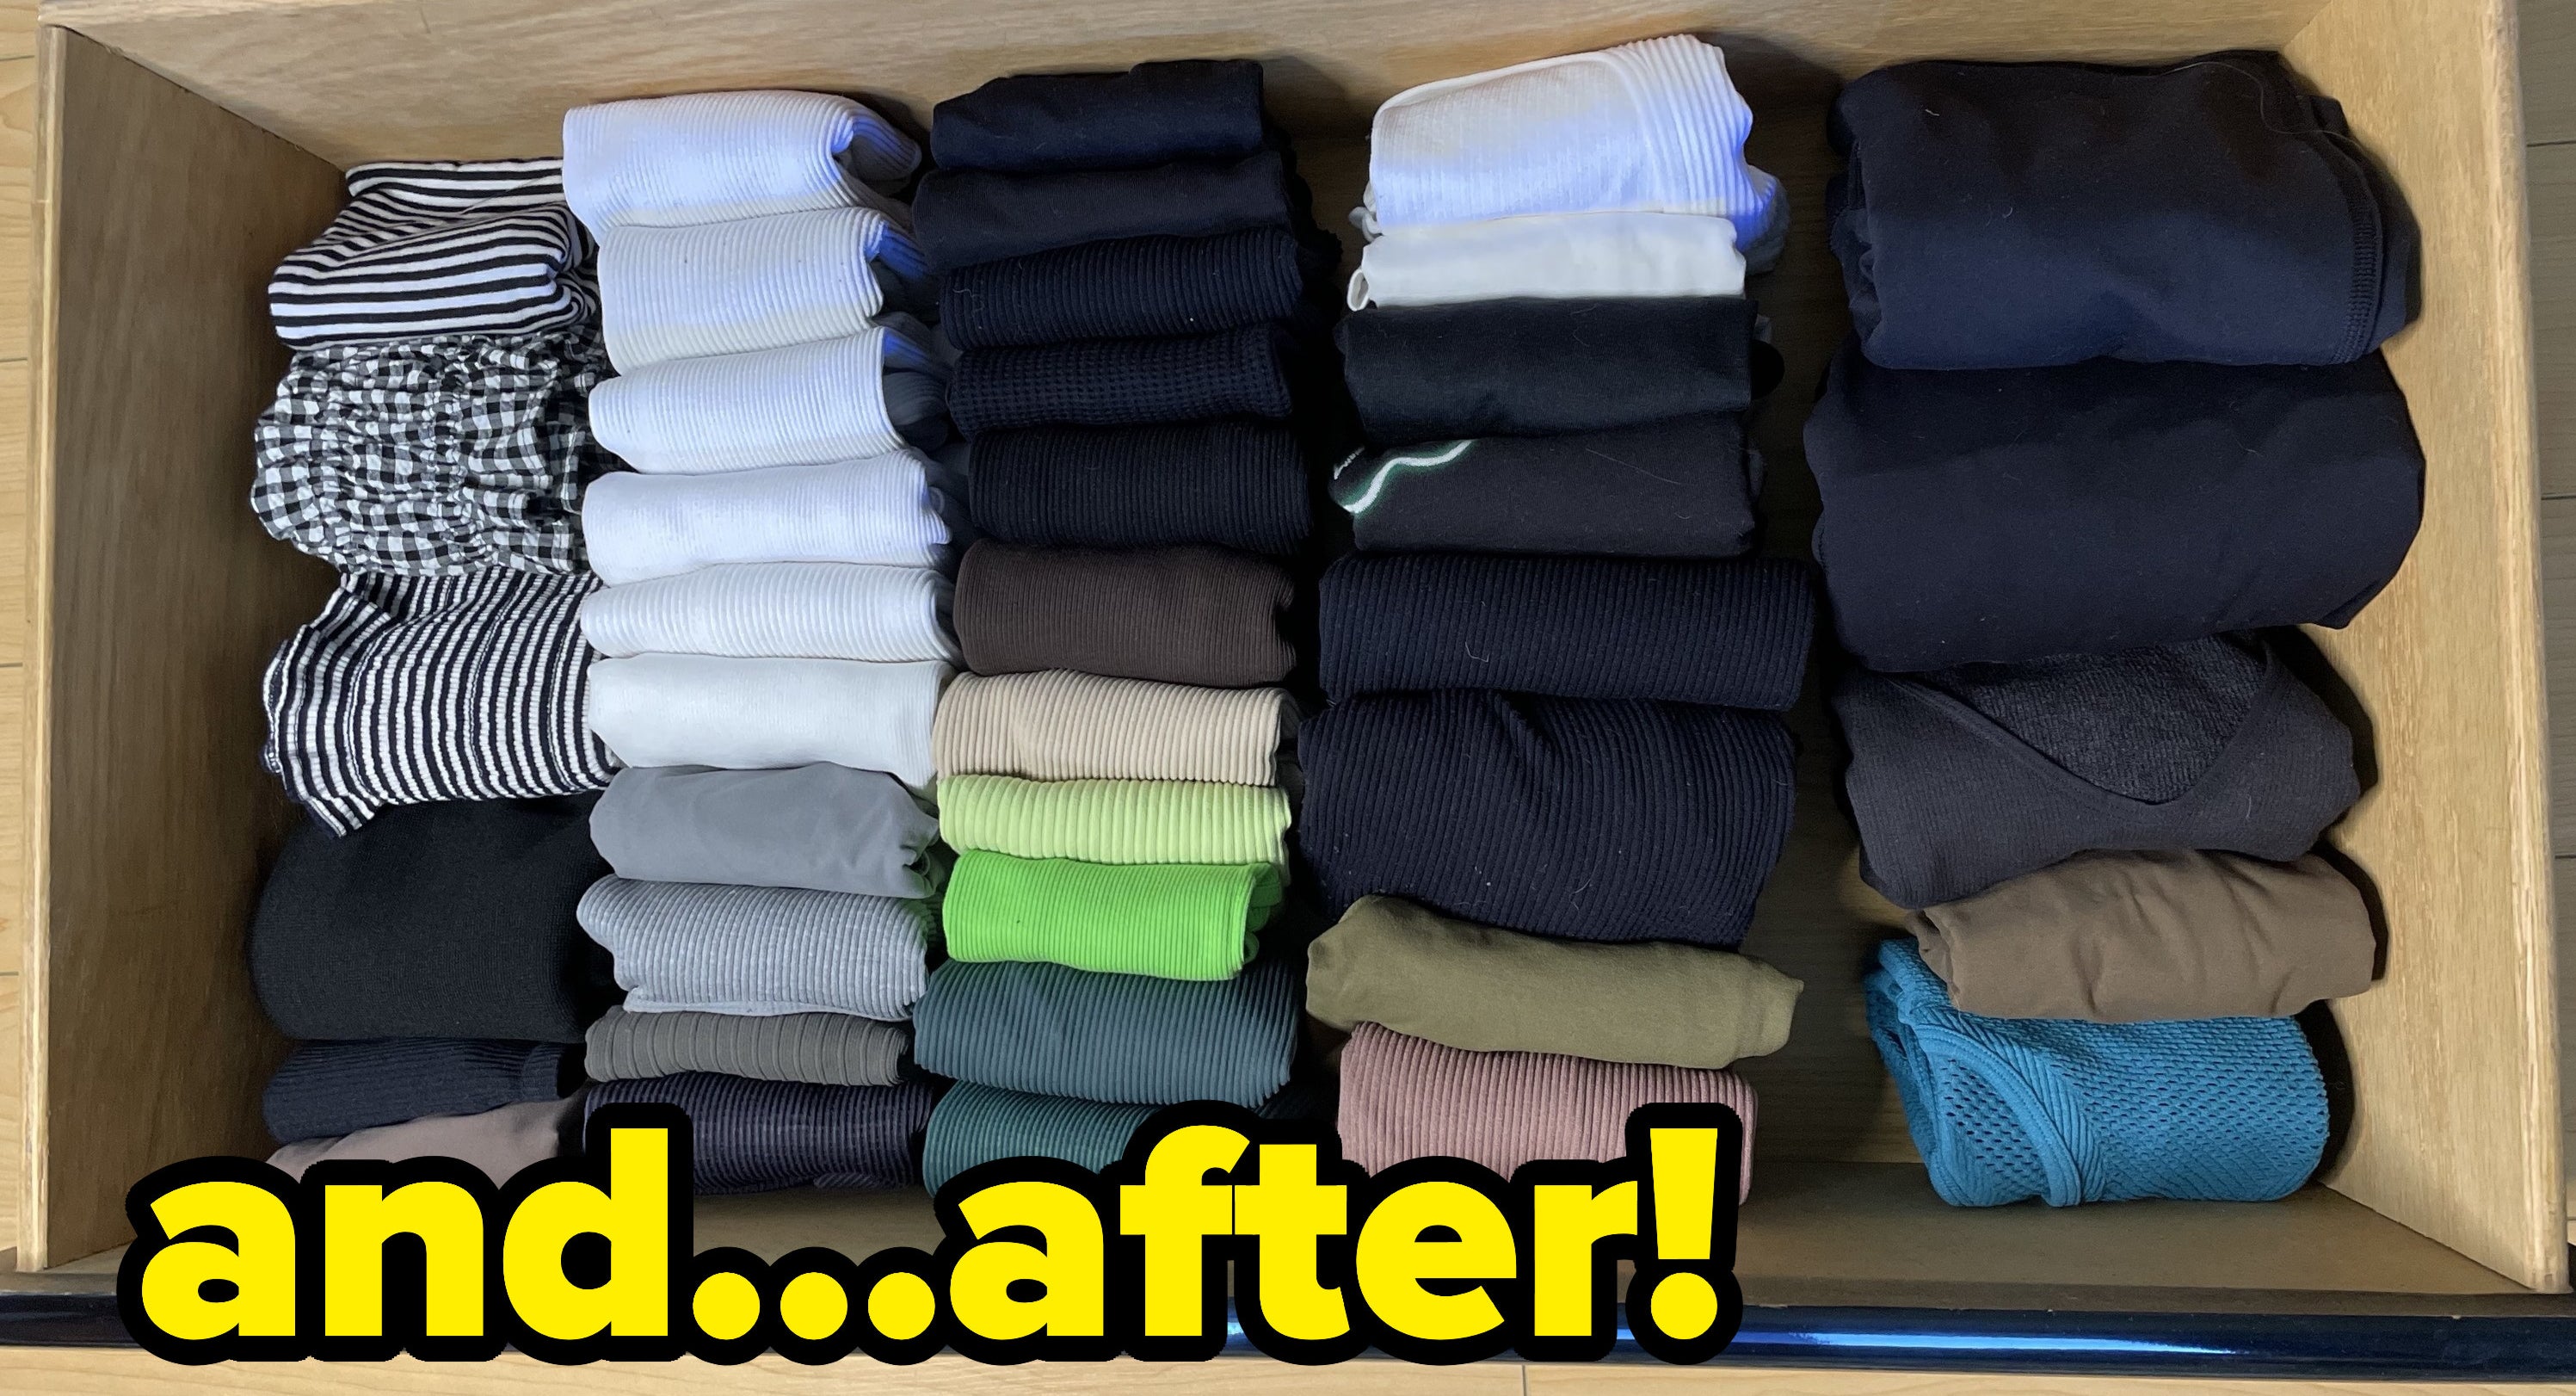 The same clothes neatly folded and placed in organized rows